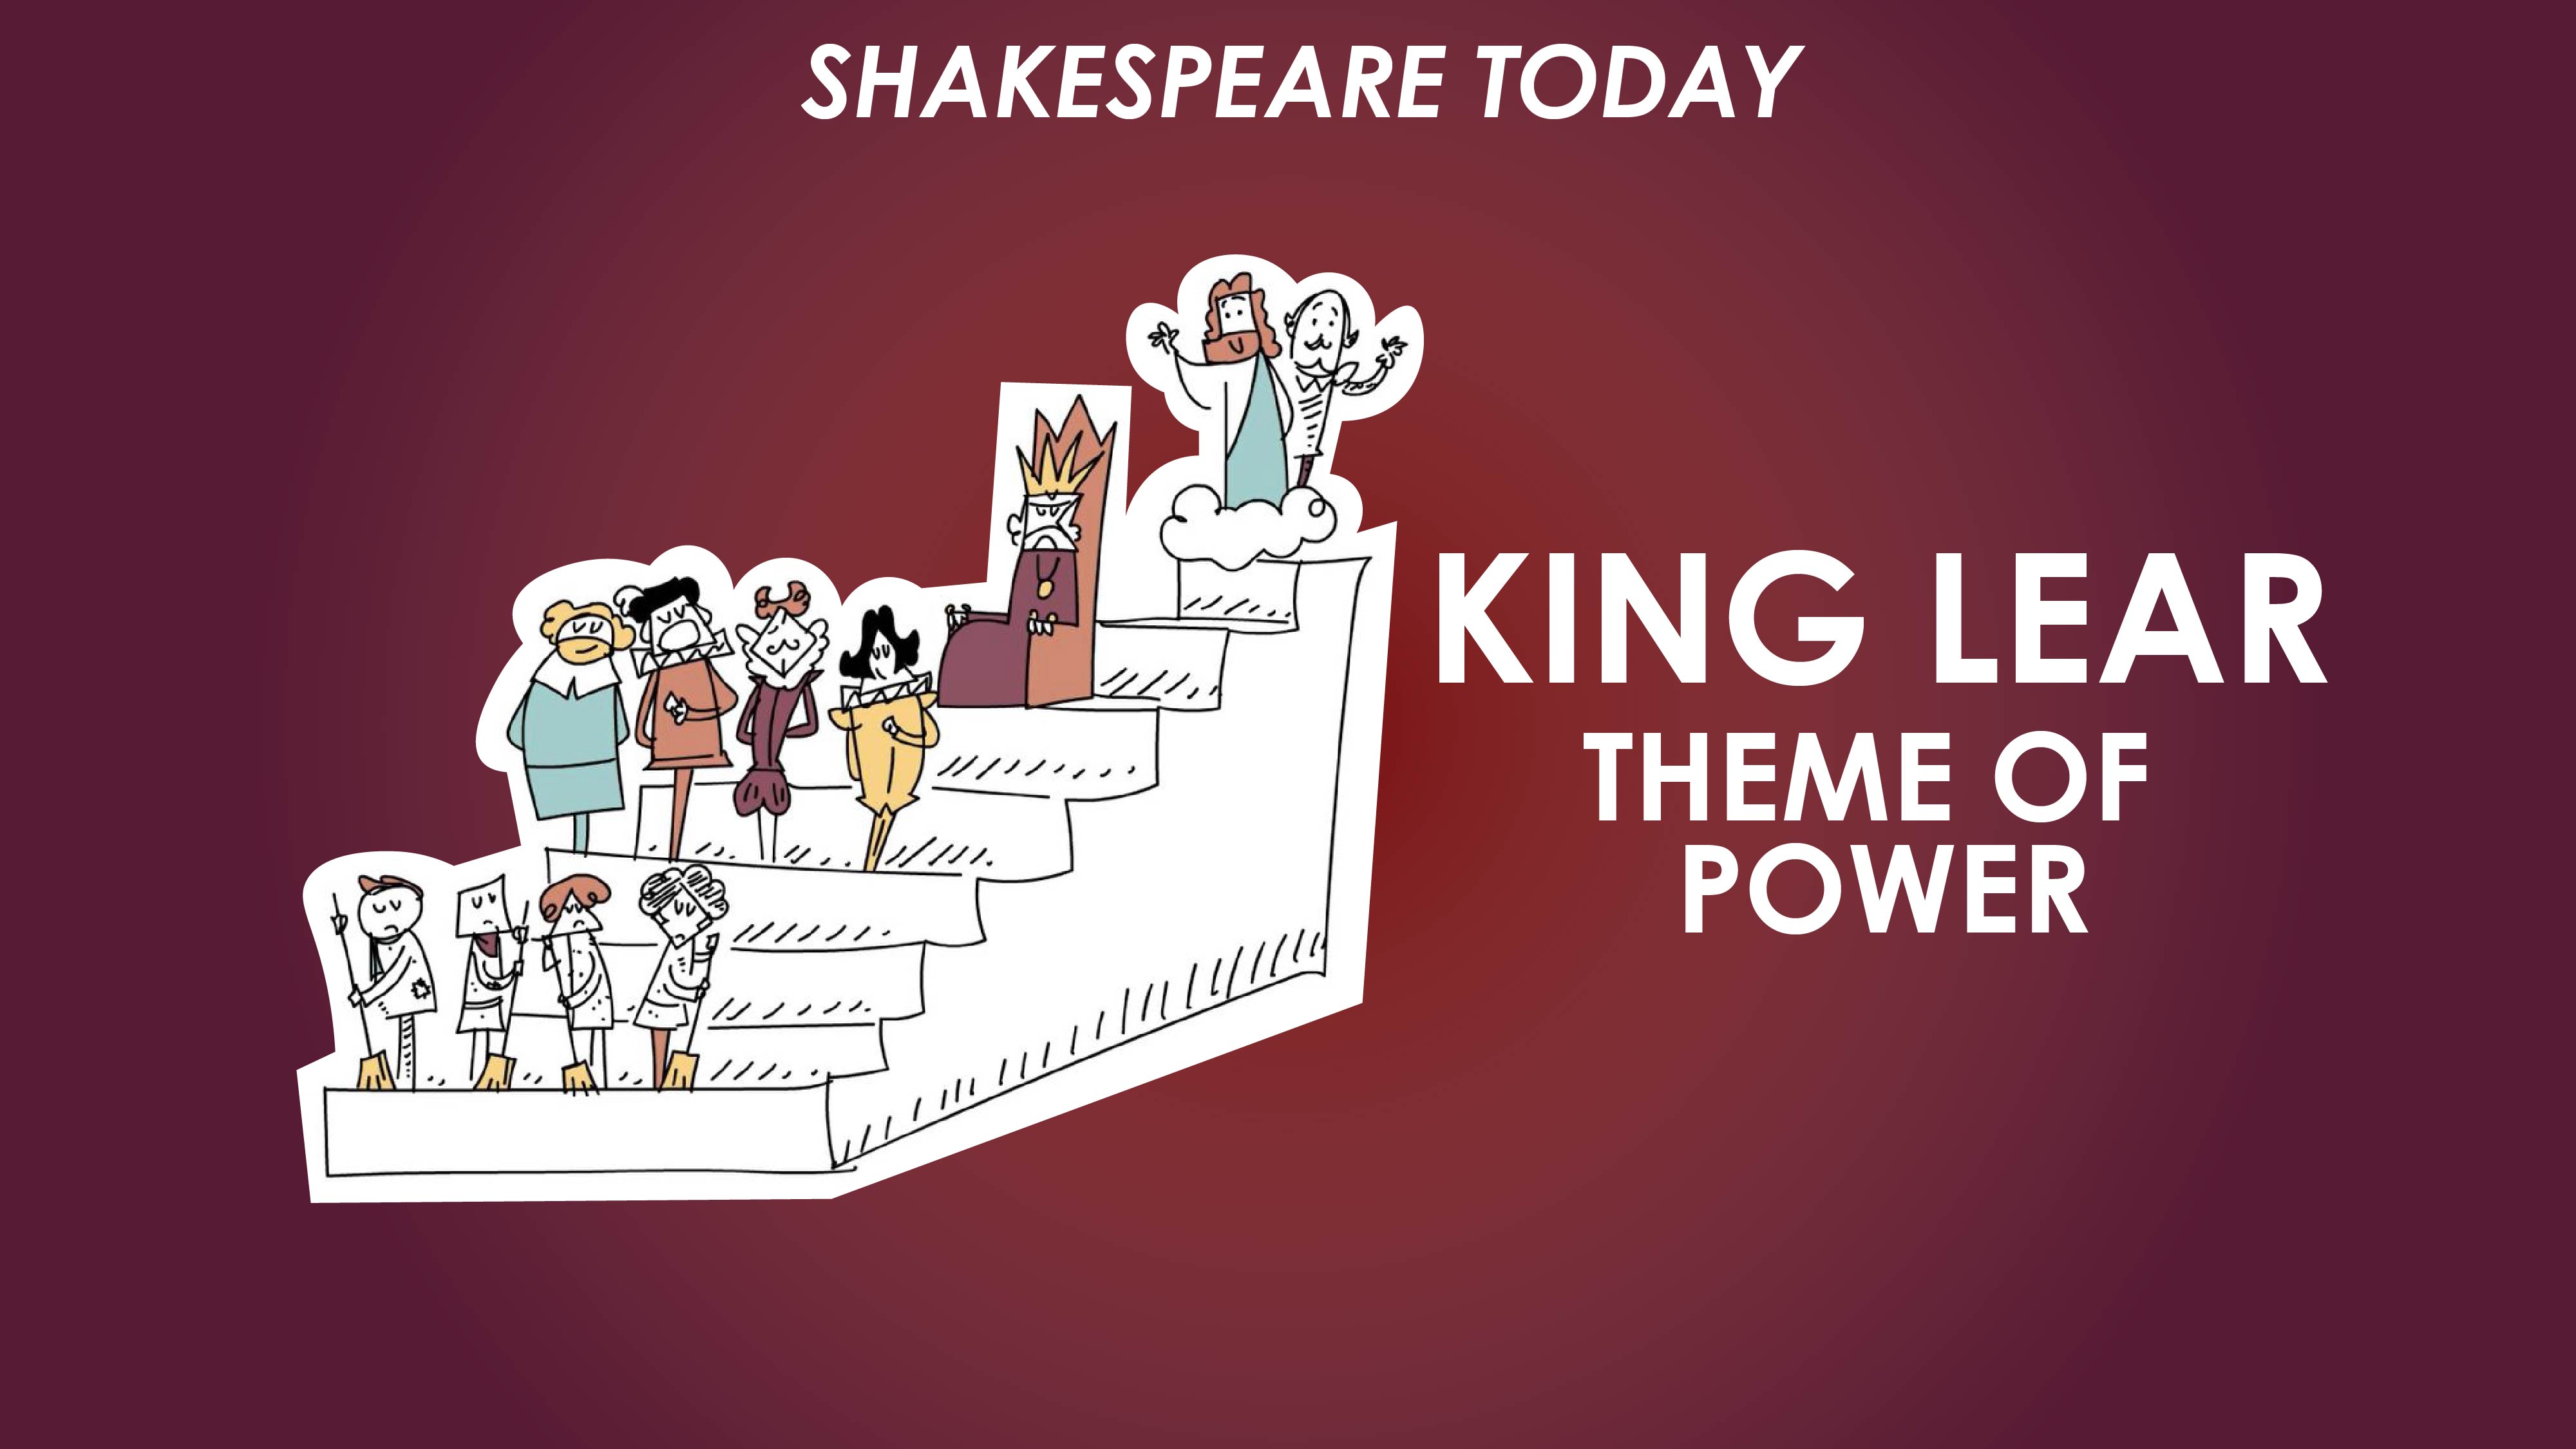 King Lear Theme of Power